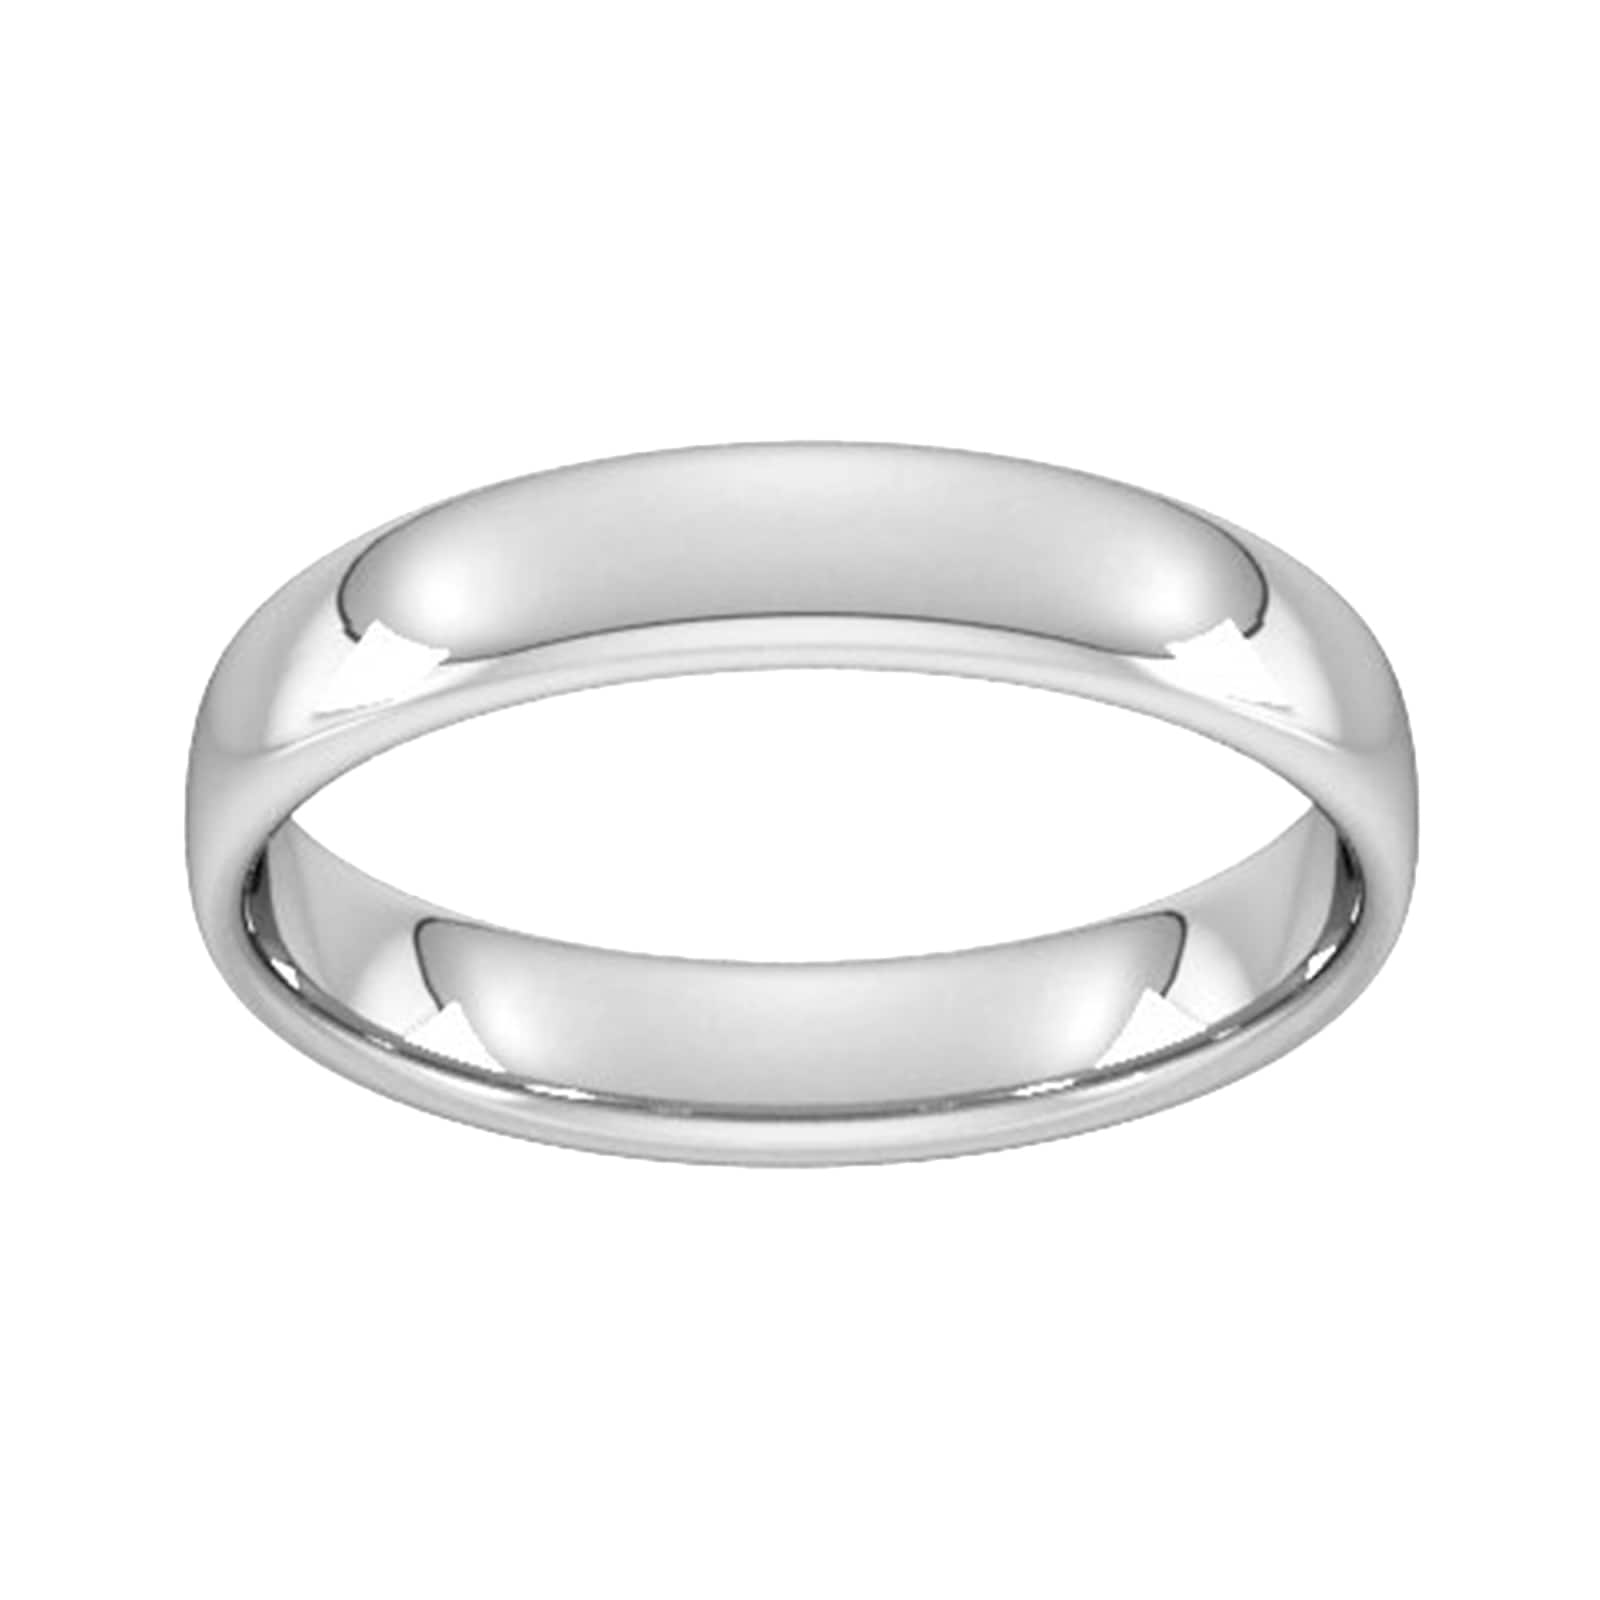 4mm Slight Court Standard Wedding Ring In Sterling Silver - Ring Size T